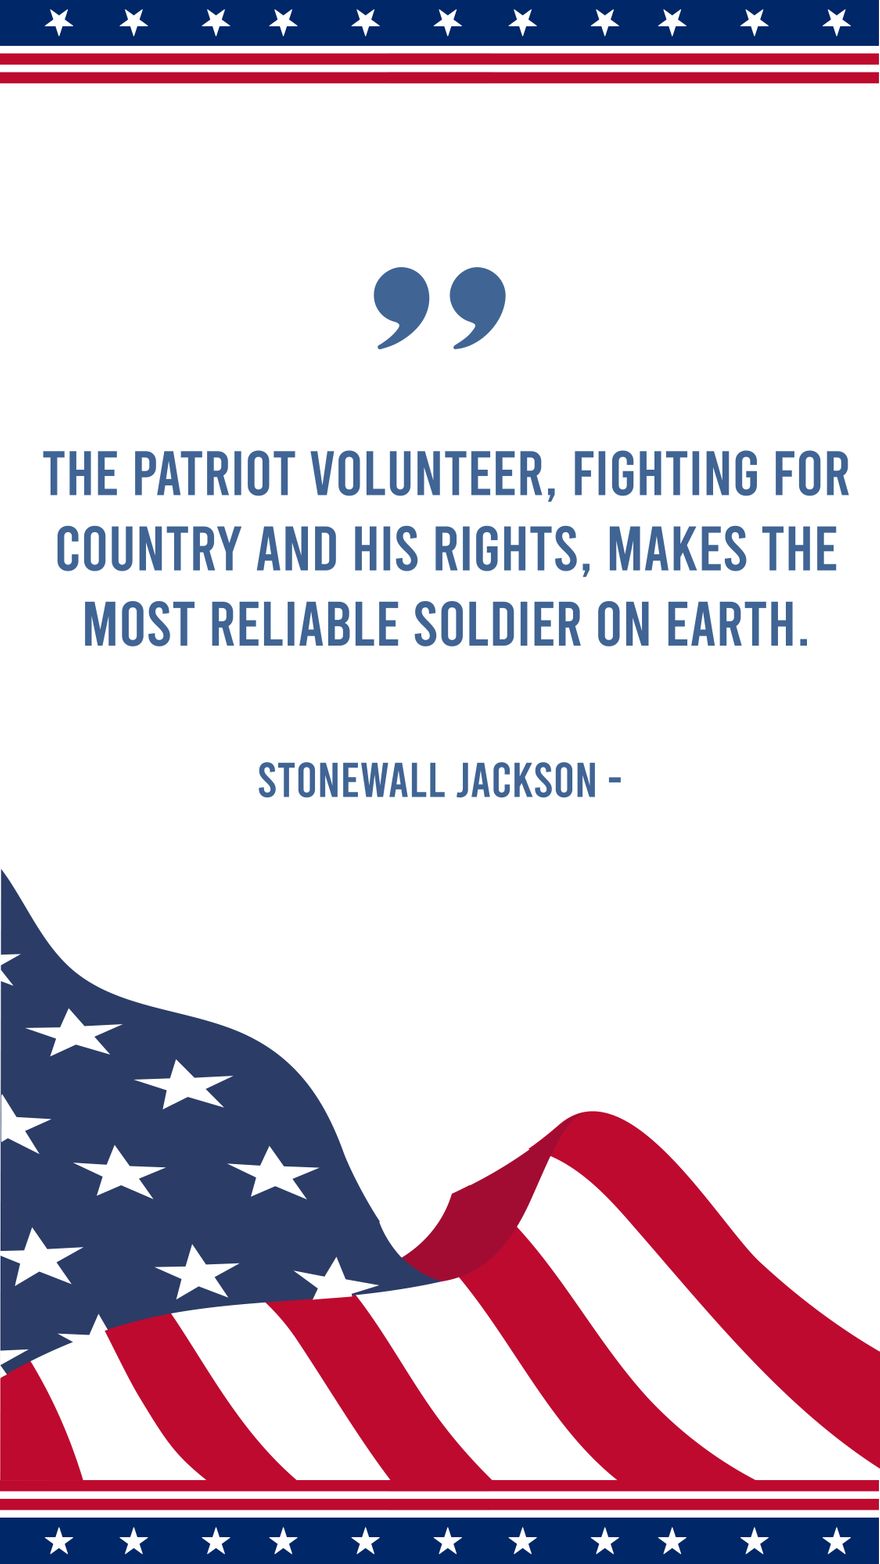 Free Stonewall Jackson - The patriot volunteer, fighting for country and his rights, makes the most reliable soldier on earth.